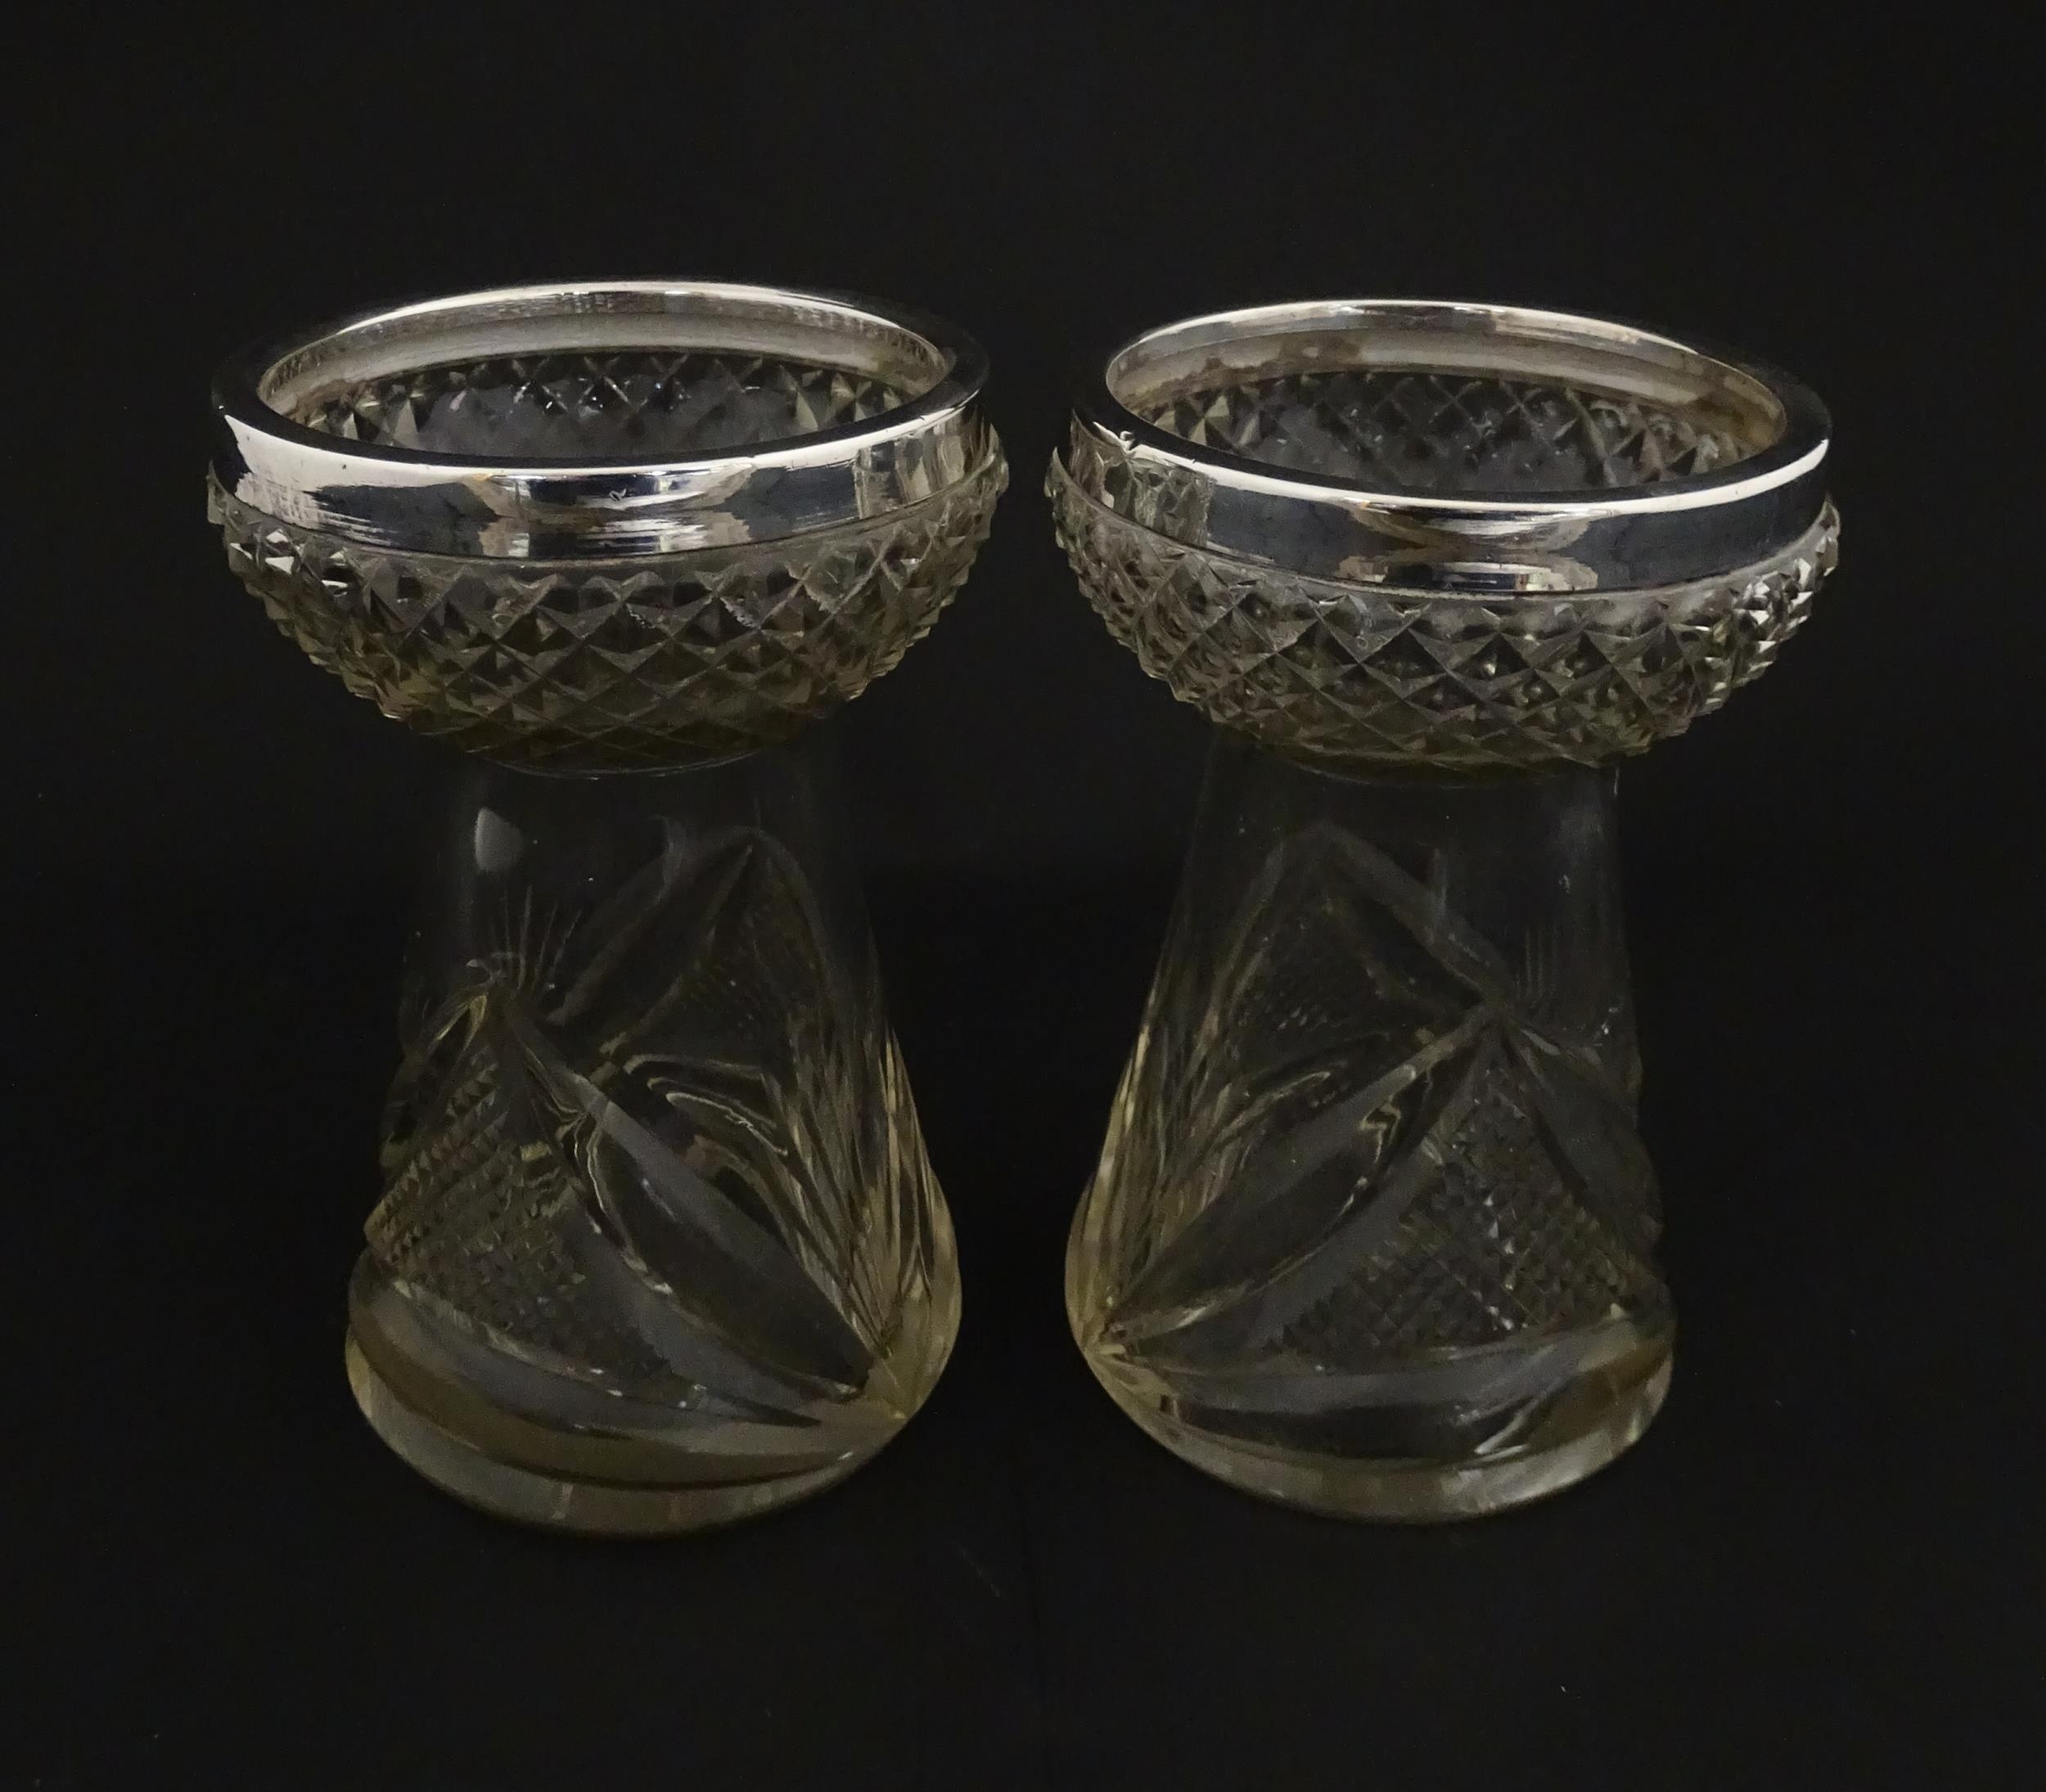 A pair of cut glass vases with silver rims in the style of hyacinth vases, hallmarked Birmingham - Image 5 of 10